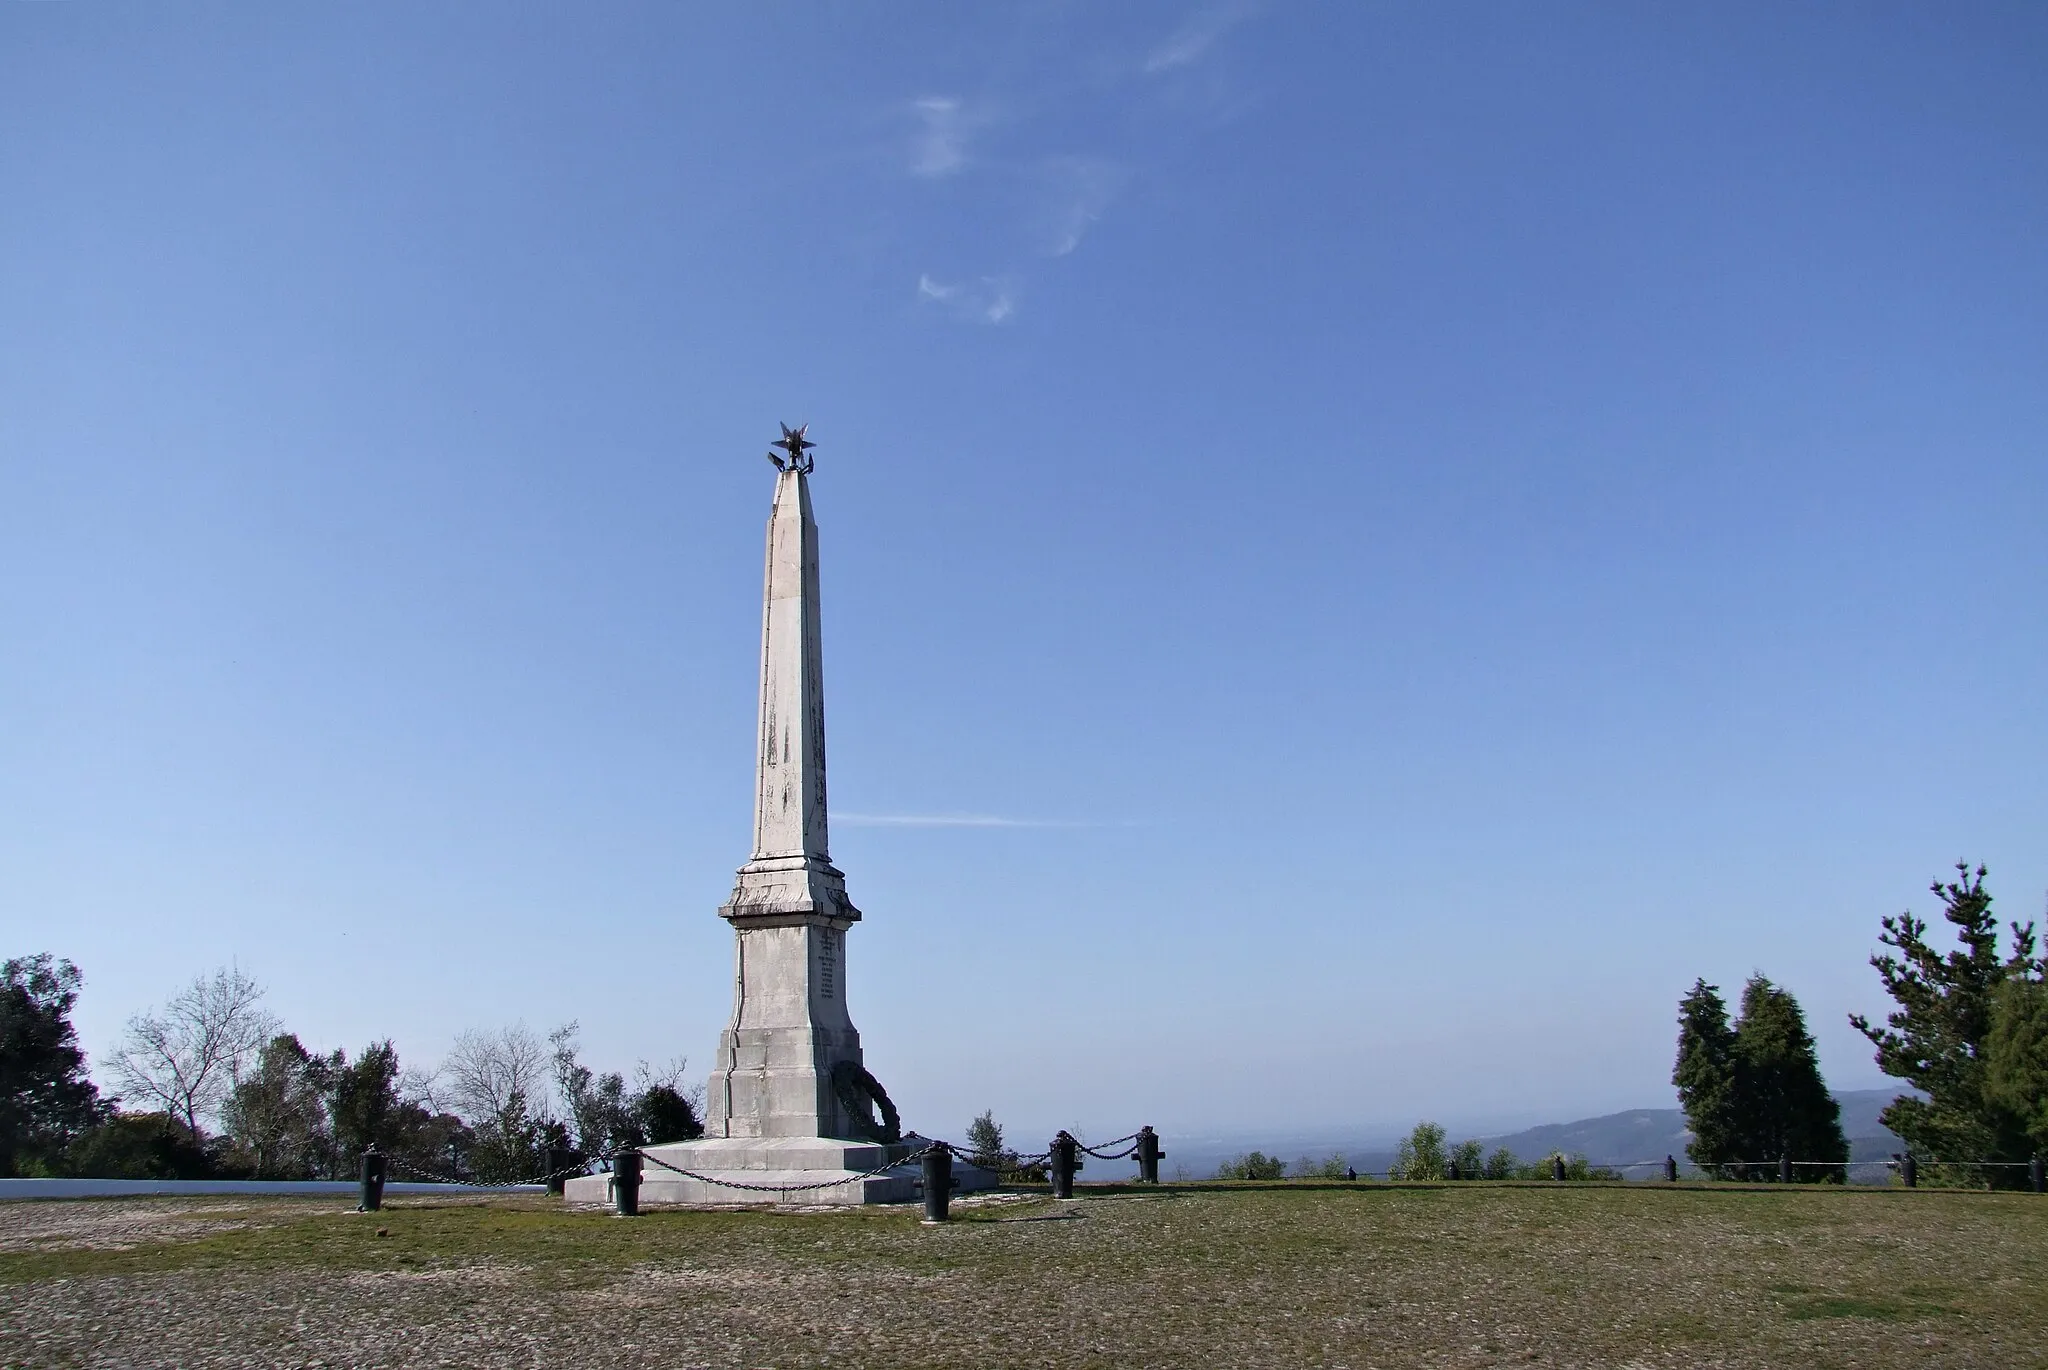 Photo showing: Bussaco (Buçaco) : memorial to the Victory (Septembre 27, 1810) of the  Anglo-Portuguese Army over the French napoléonic invader.
The obelisk, erected in 1873, as well as the whole site, are surrounded by cannons taken from the enemy.